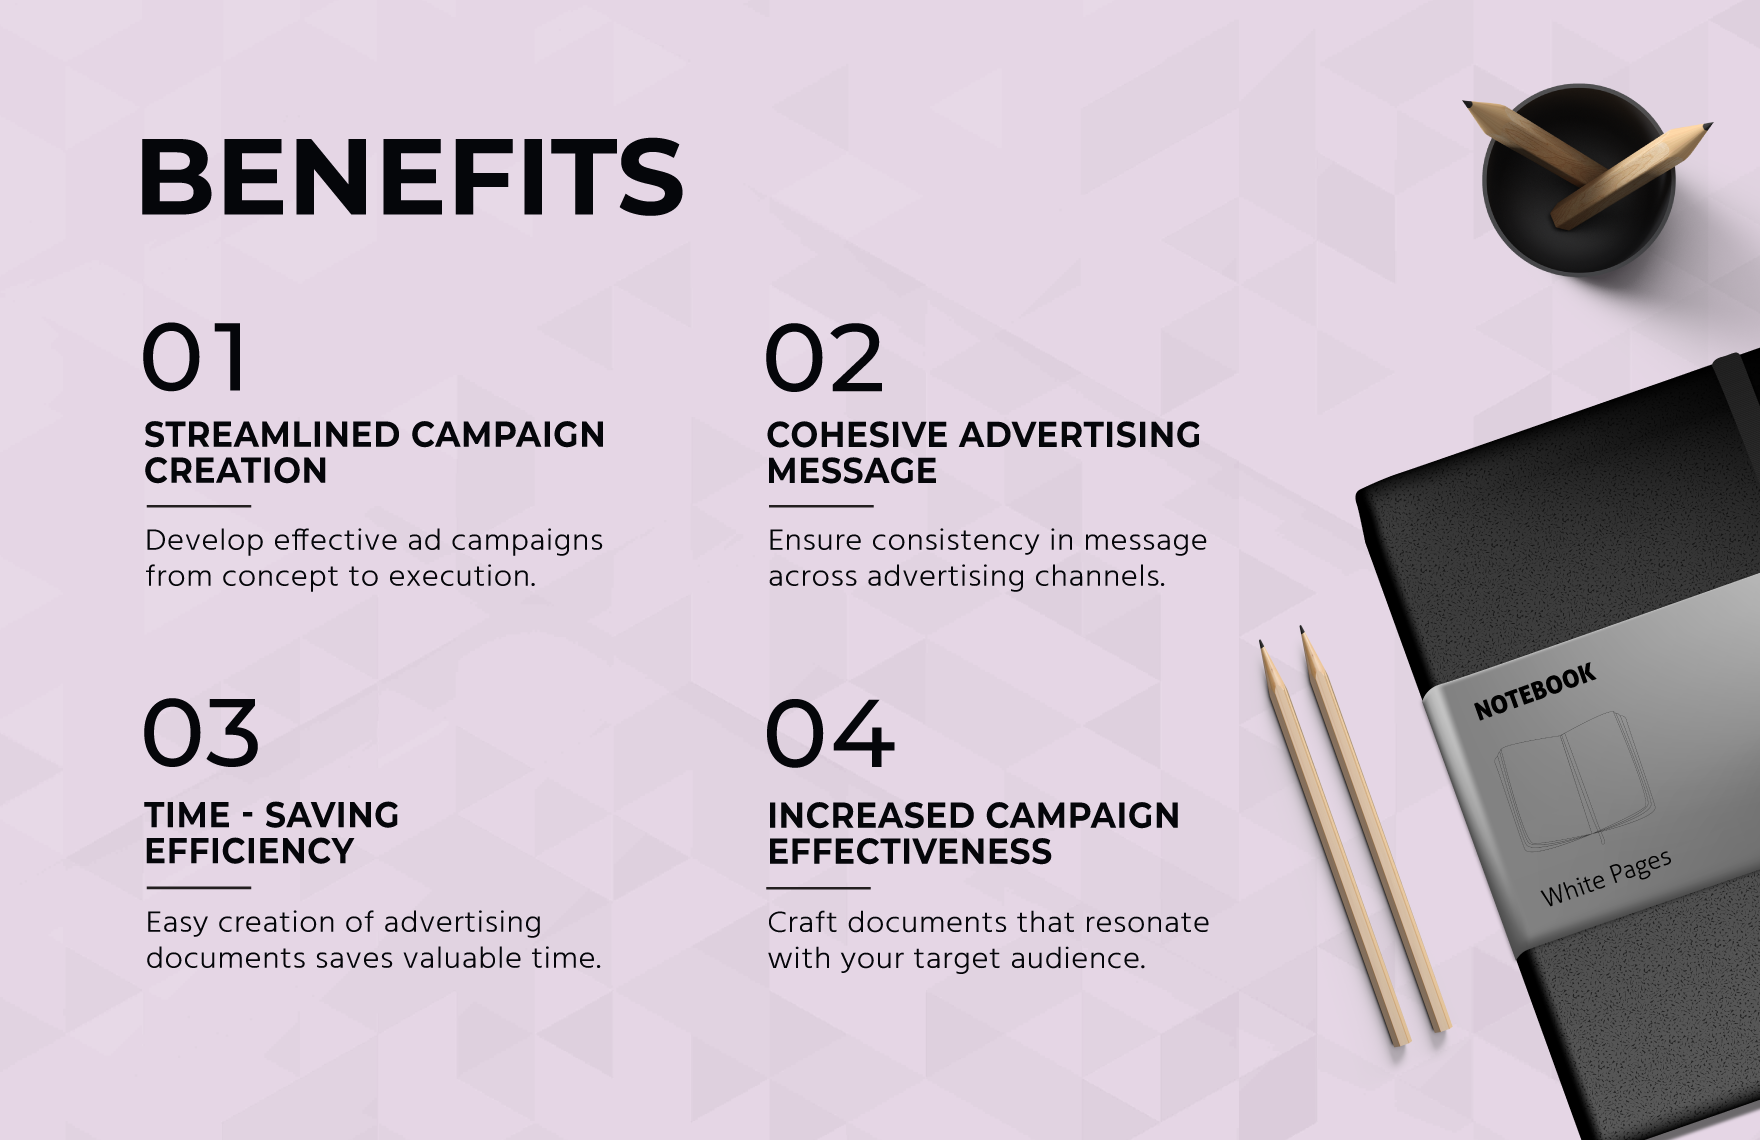 Brand Activation Advertising Campaign Plan Template